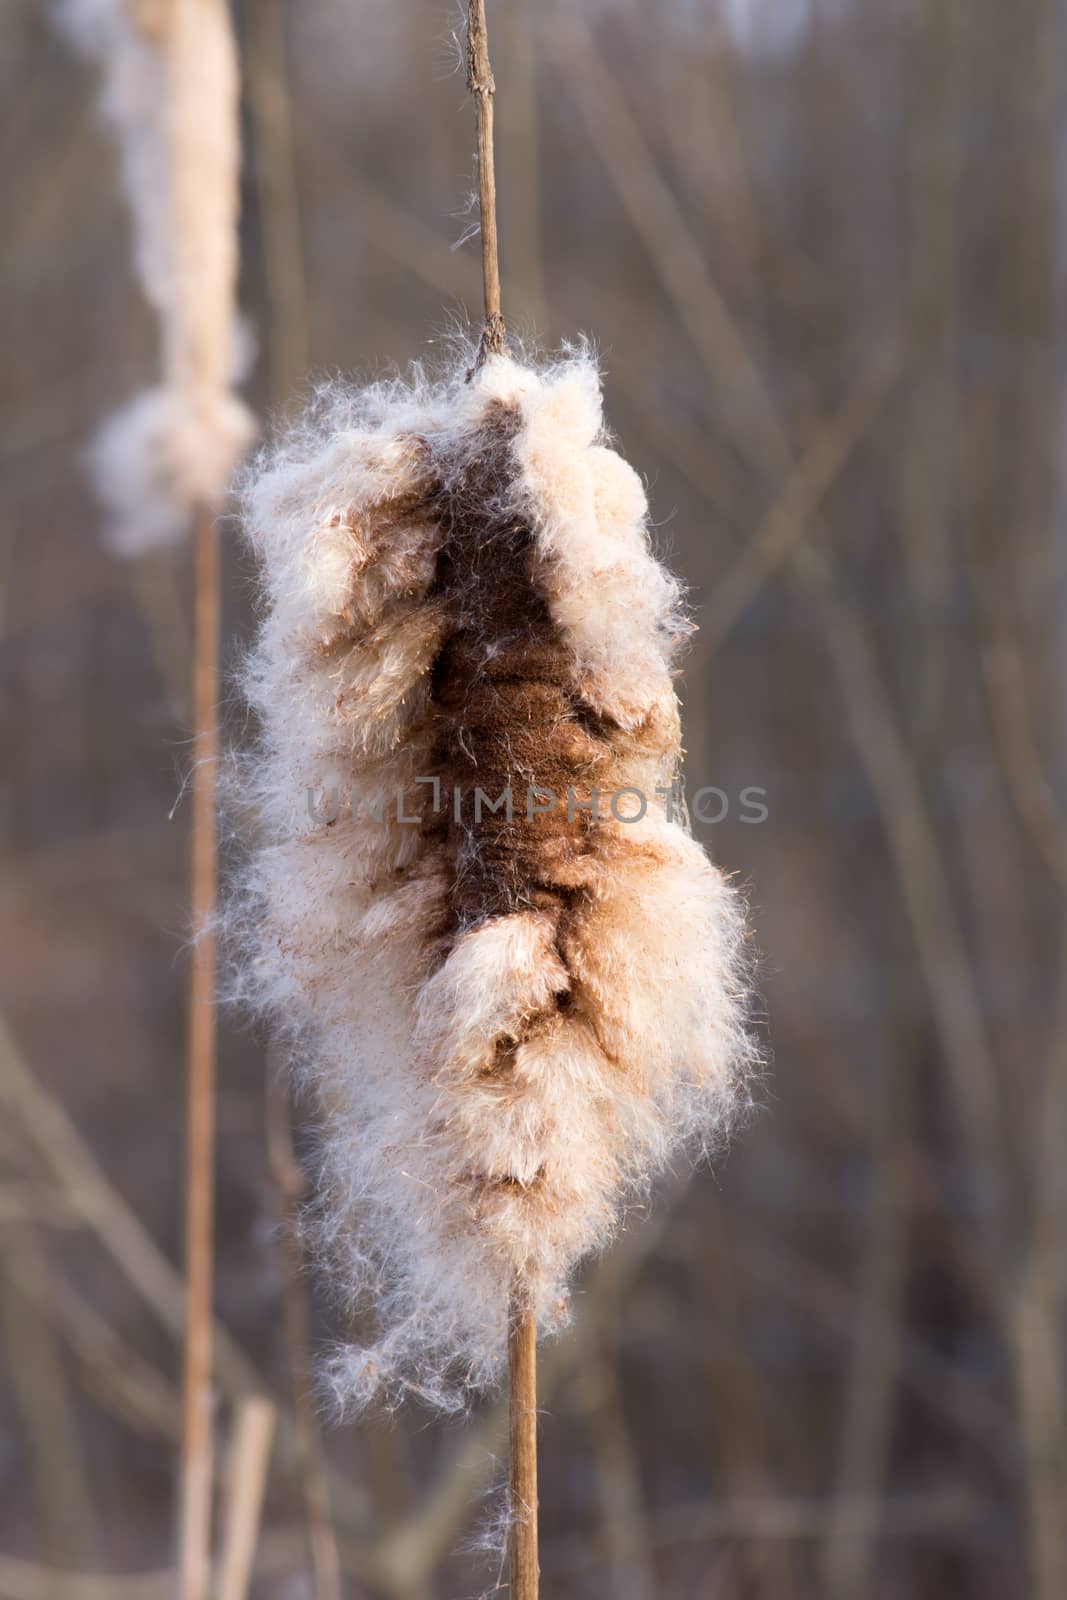 Cattail (Typha latifolia) mace made from the seeds disperse.